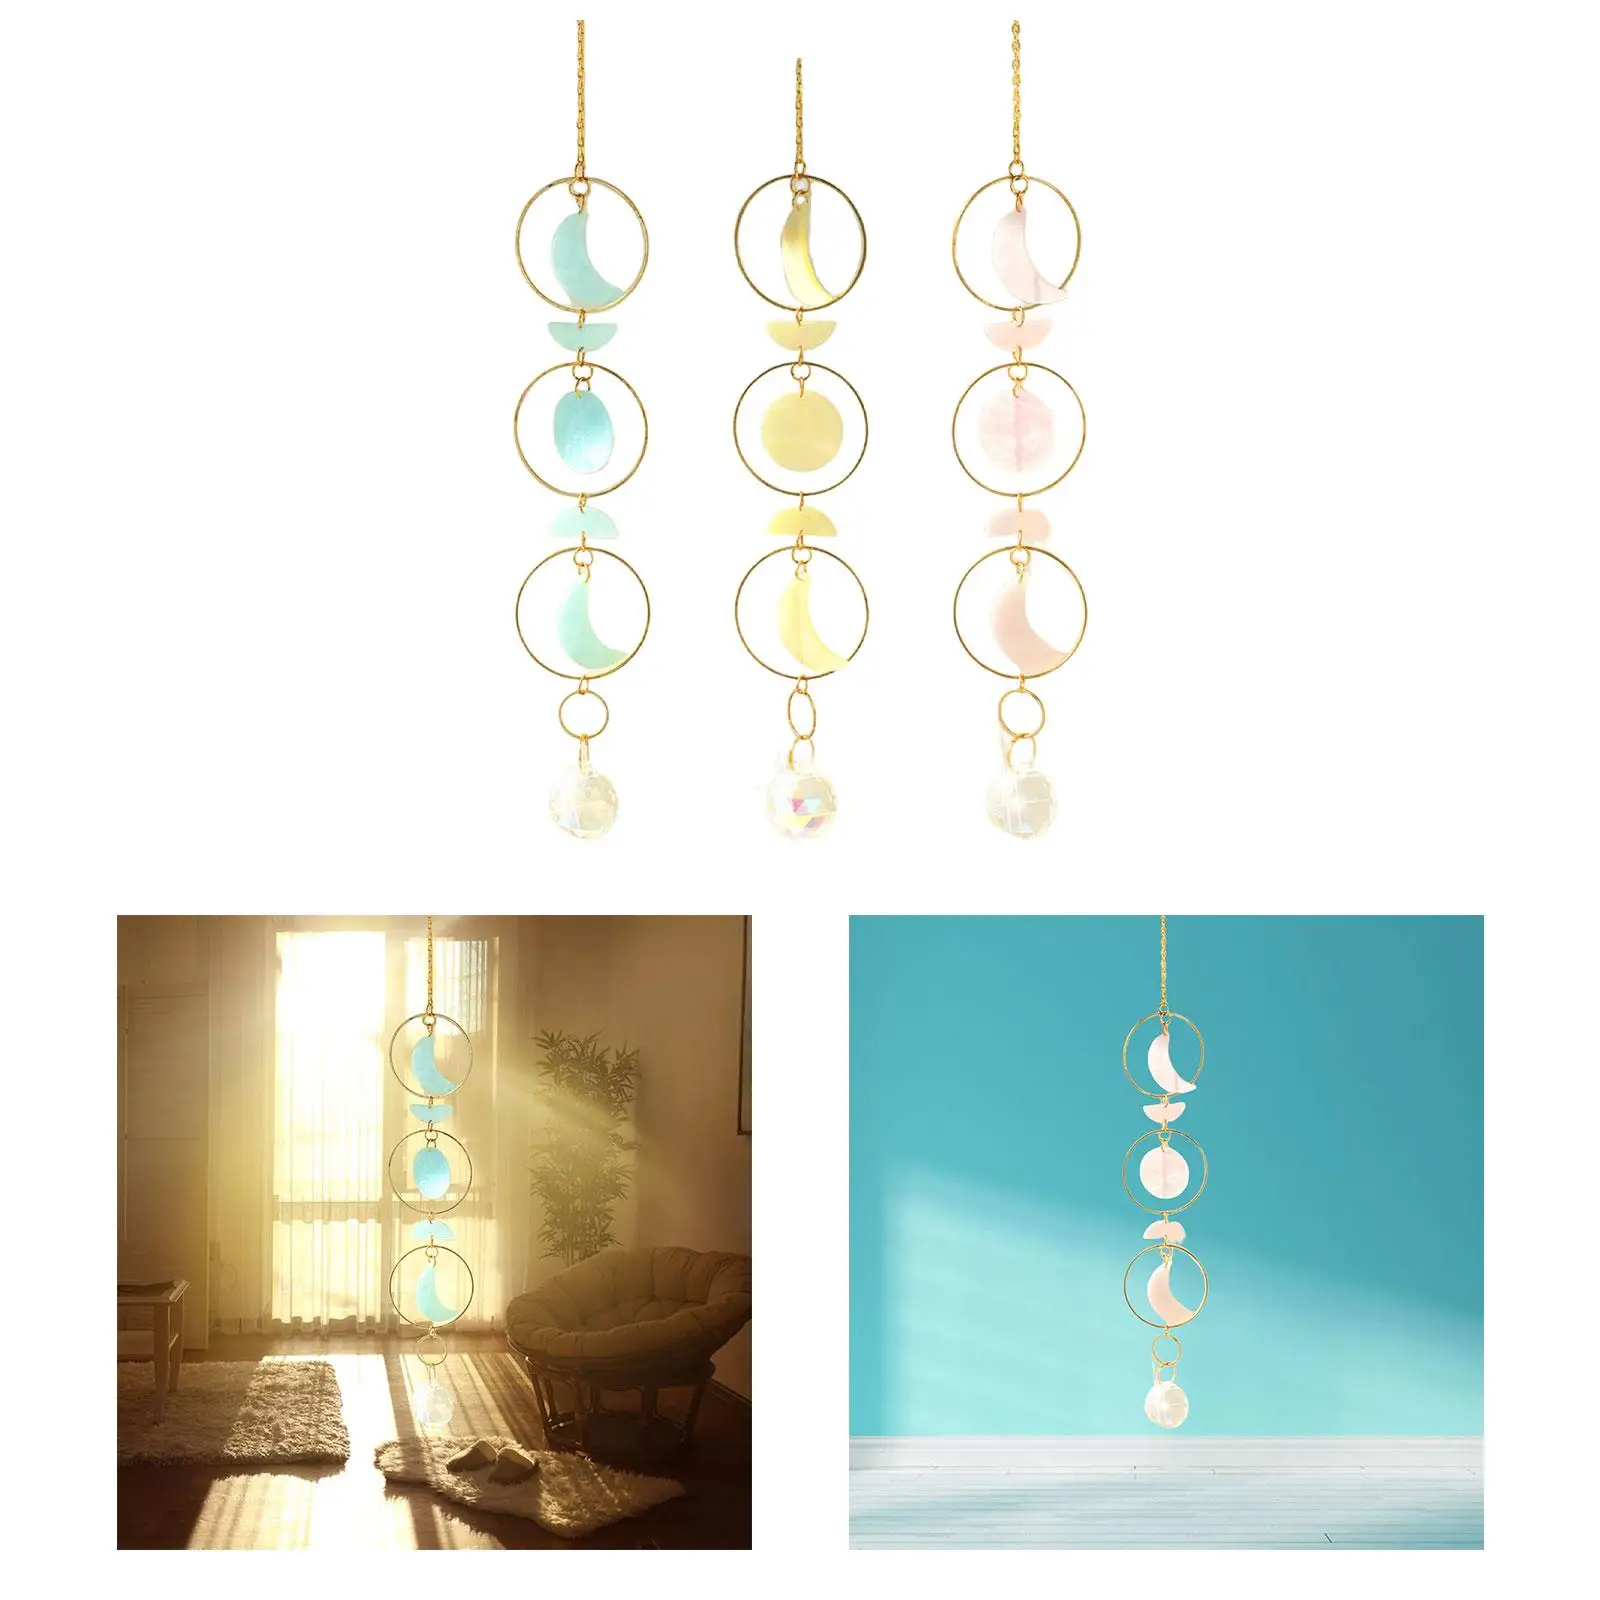 Pendant with Chain Ornament Rainbow Make Prisms Decor for Wedding Wall Office Car Decoration